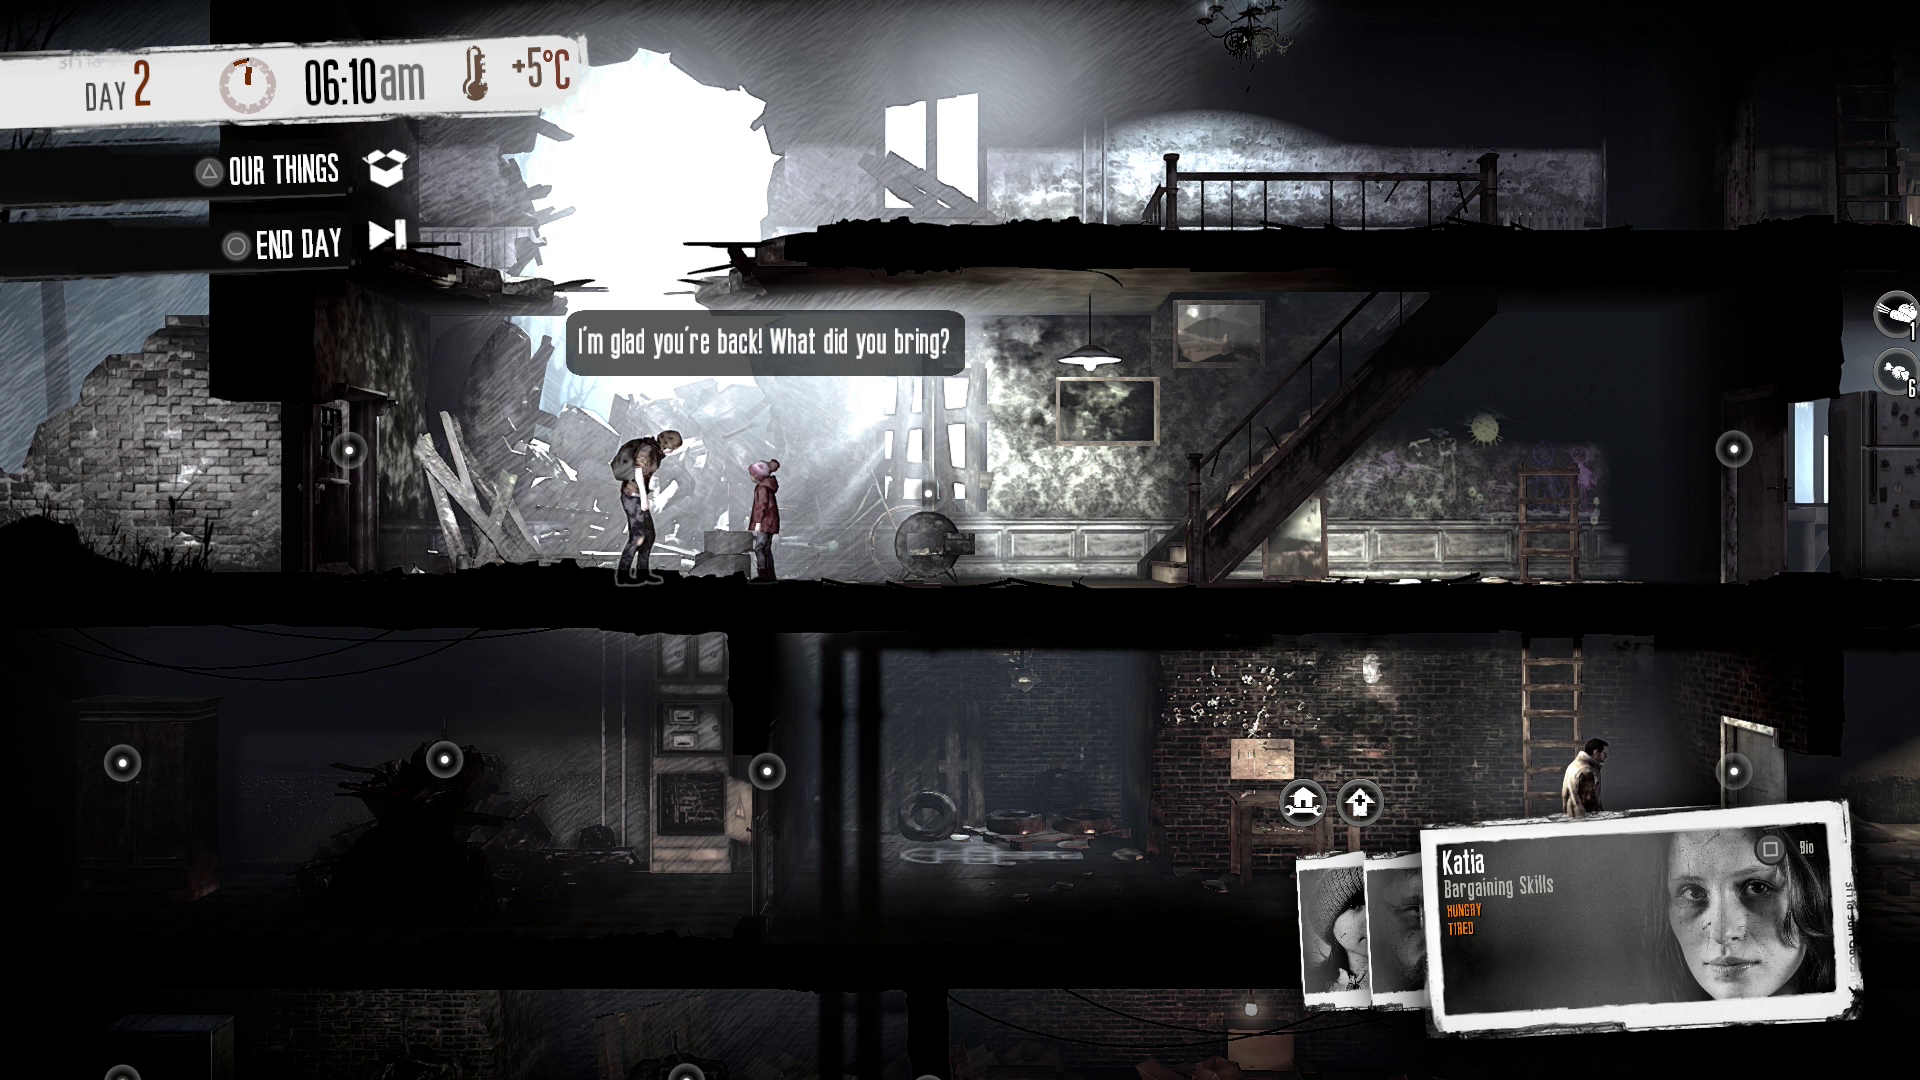 download this war of mine the little ones for free